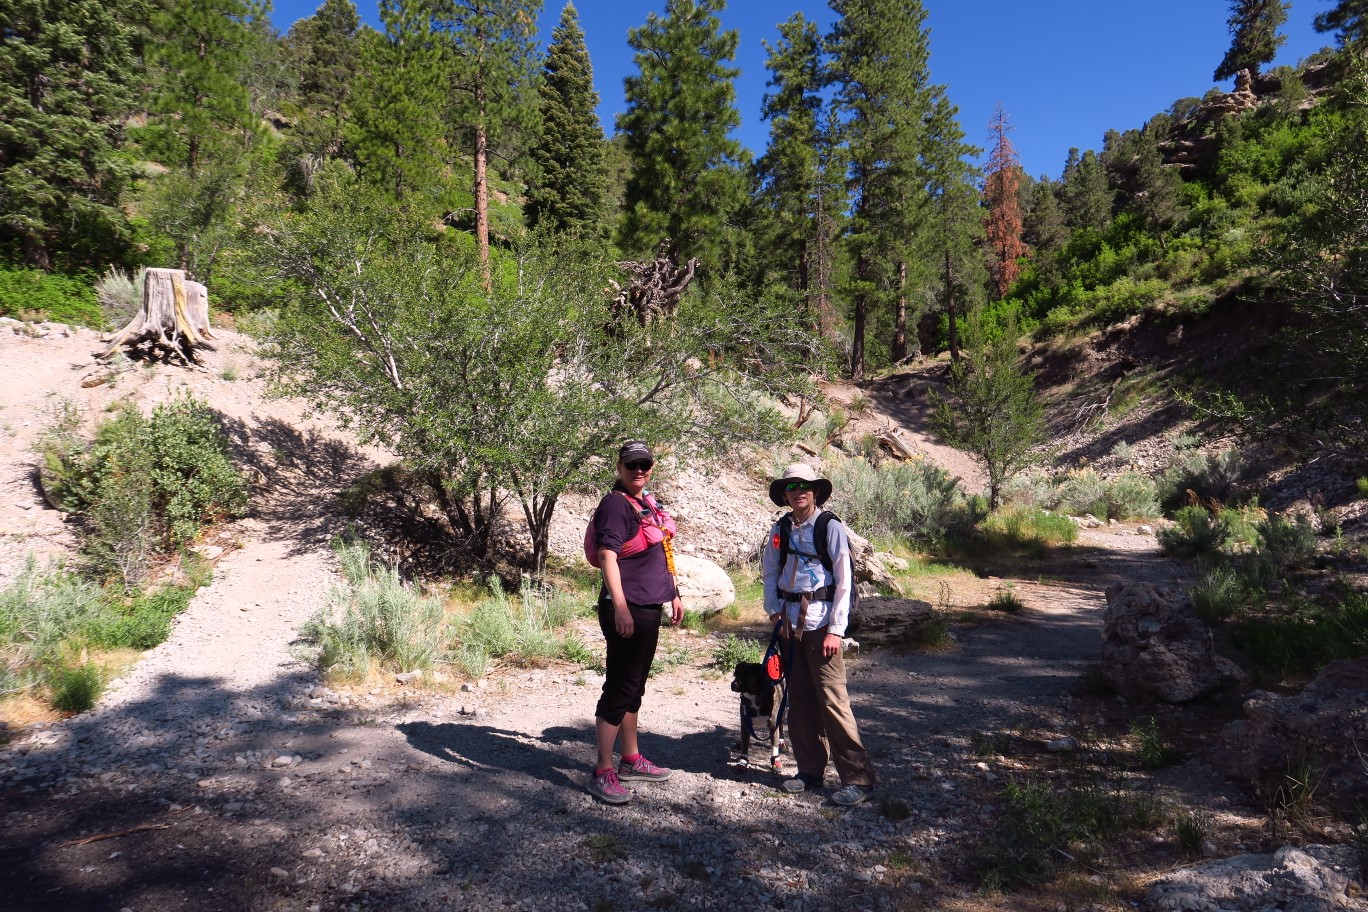 01-family_at_trailhead-nice_day_for_a_hike